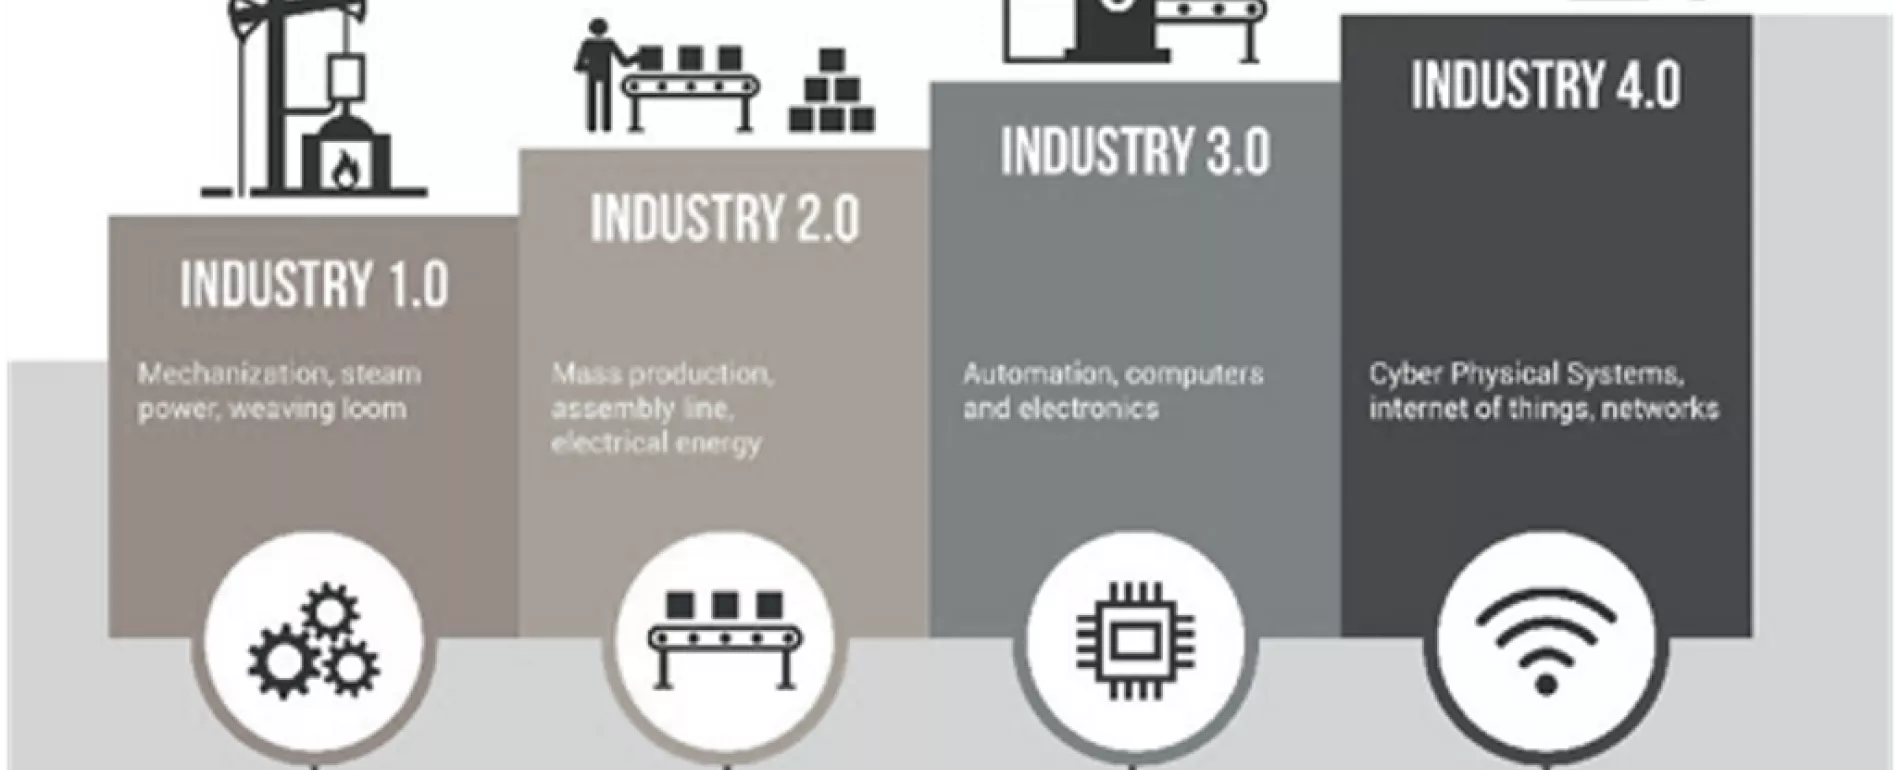 The 4th Industrial Revolution - the evolution of manufacturing